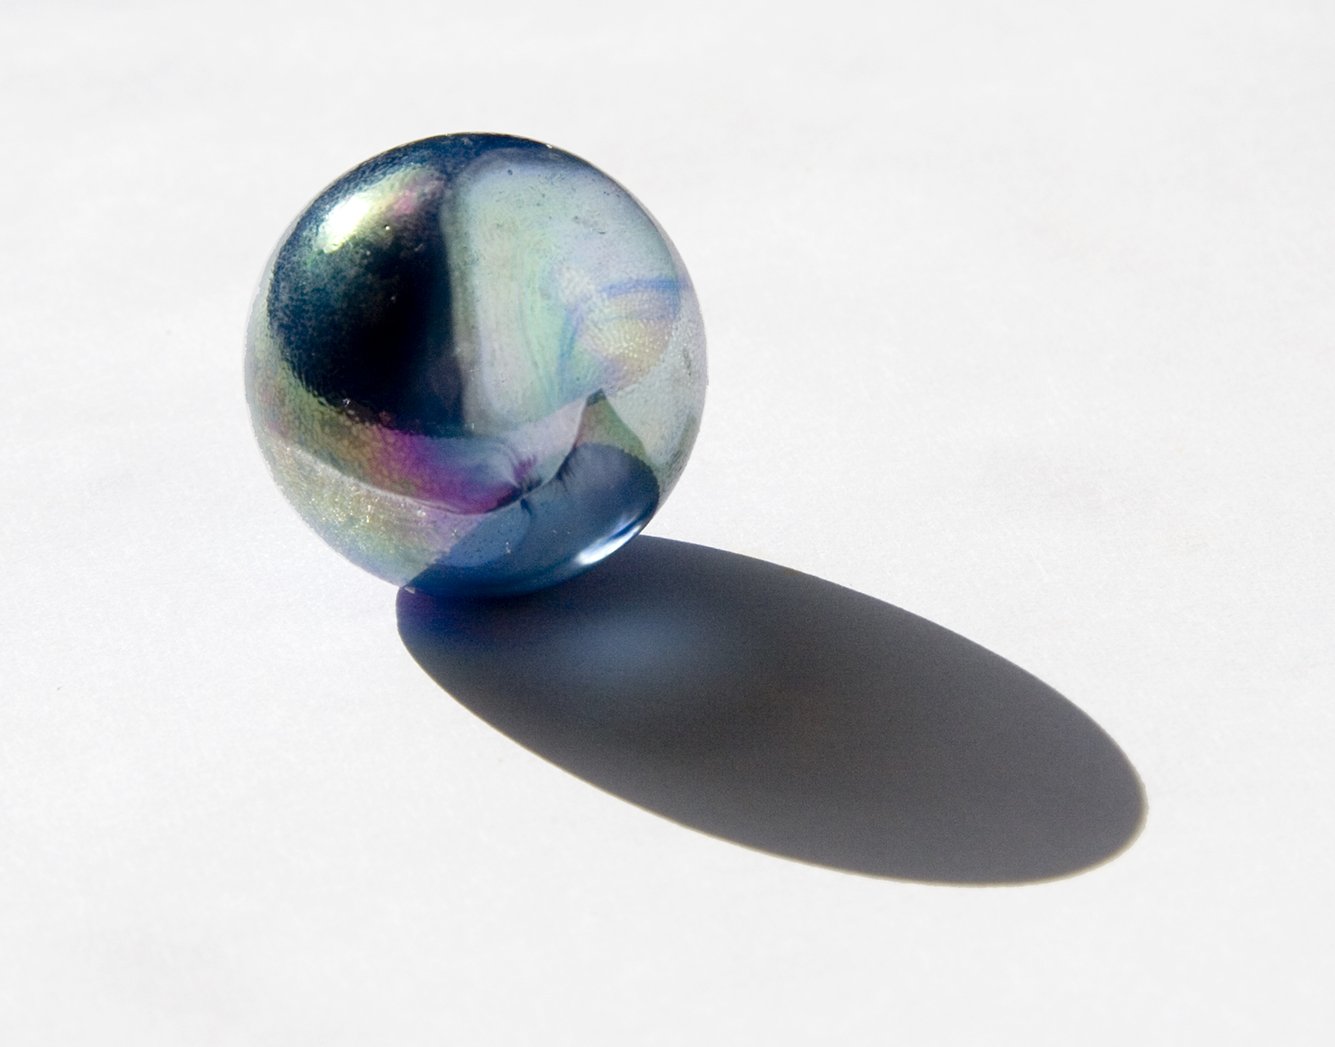 this image is of a shiny pearl with a dark blue base